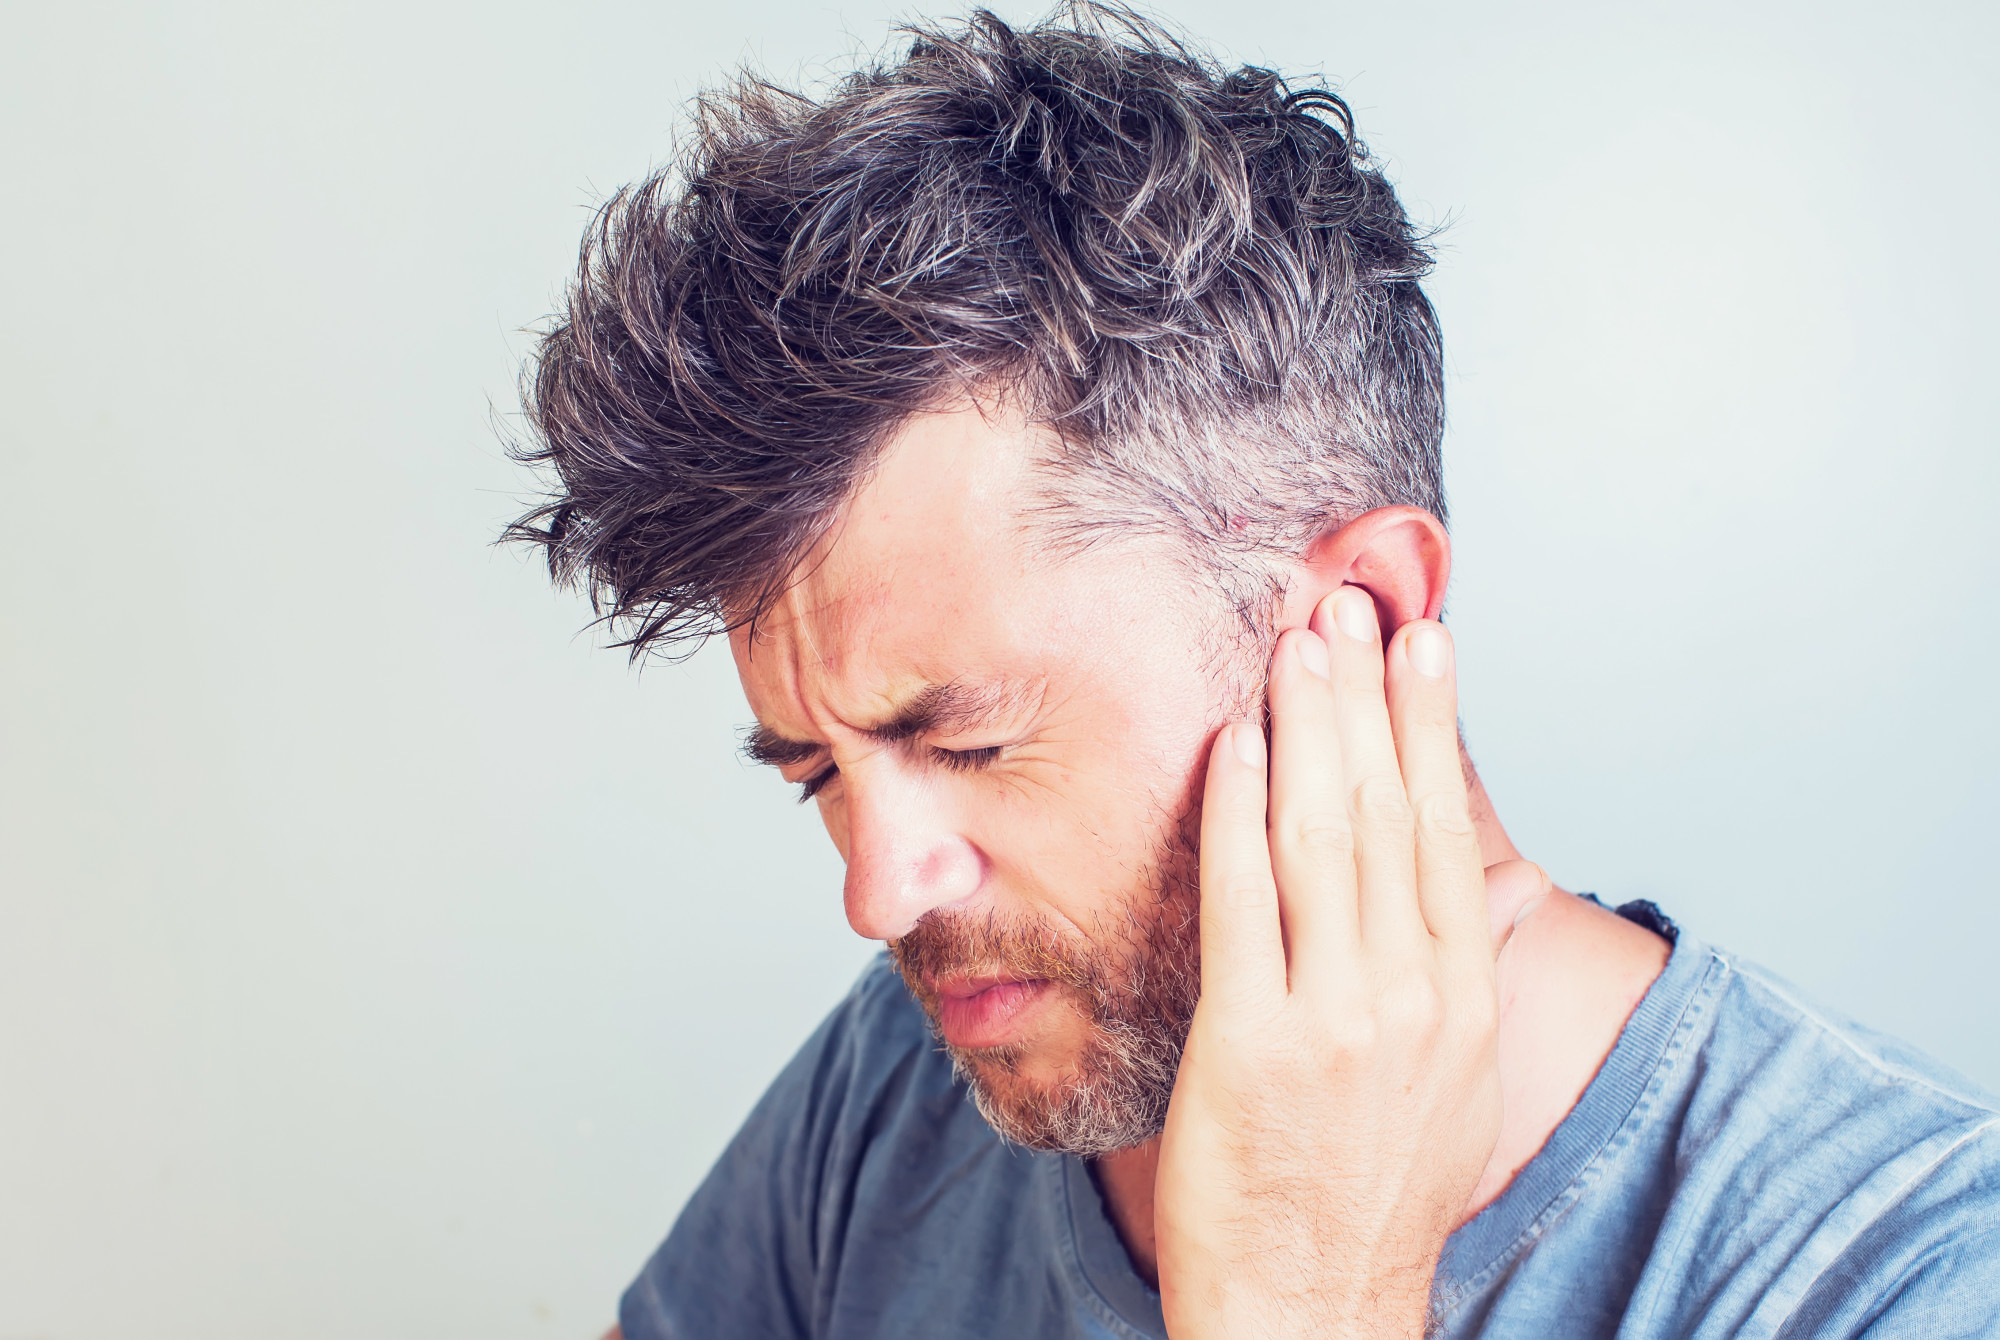 8 Tinnitus Natural Treatment Tips You May Not Know About